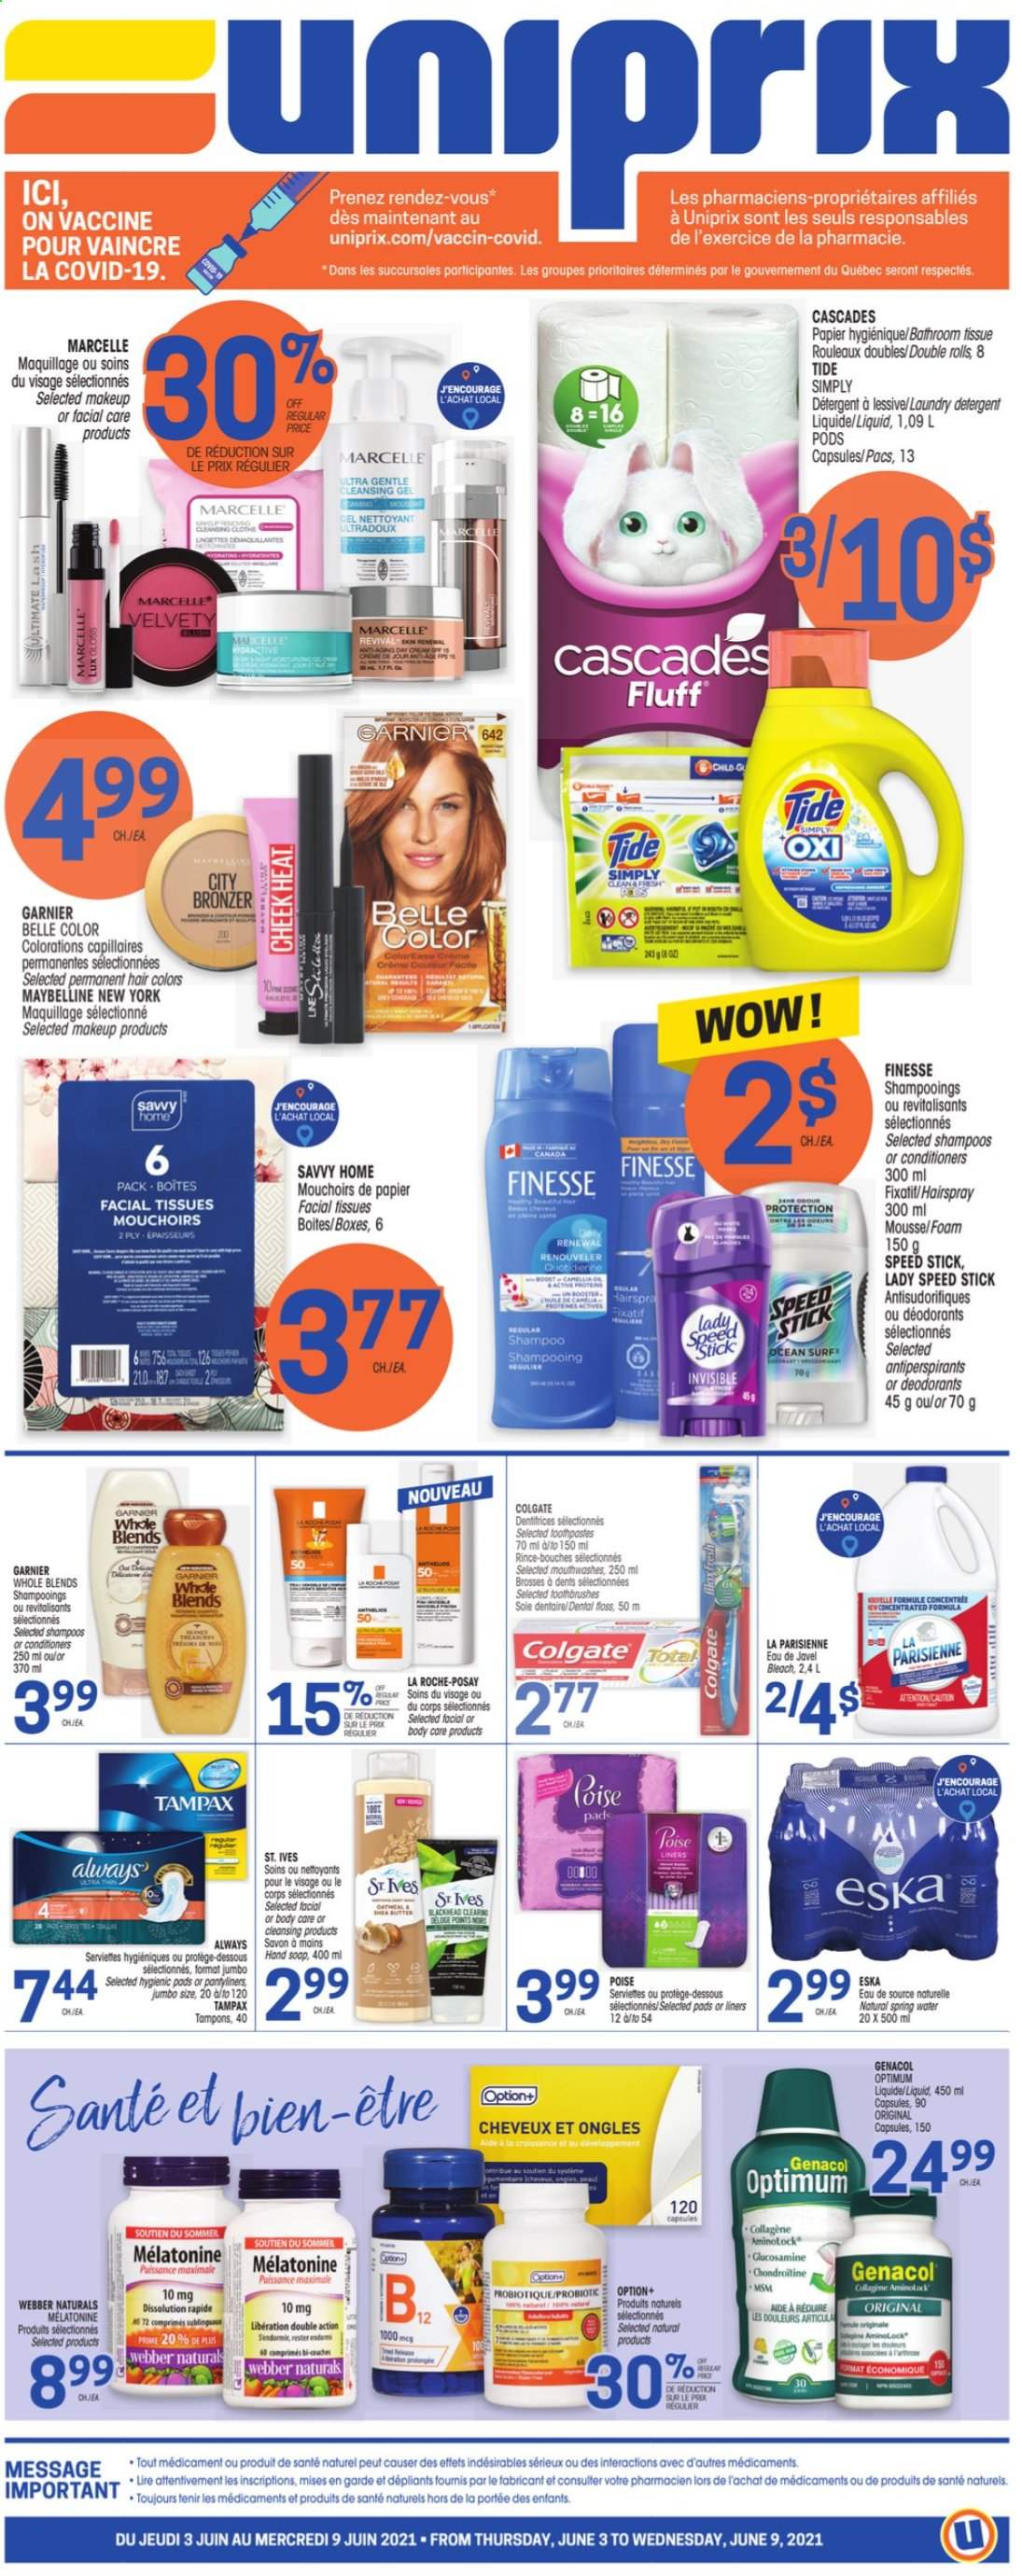 thumbnail - Uniprix Flyer - June 03, 2021 - June 09, 2021 - Sales products - spring water, bath tissue, bleach, Tide, laundry detergent, hand soap, soap, sanitary pads, pantyliners, tampons, facial tissues, La Roche-Posay, Speed Stick, makeup, bronzing powder, Garnier, Maybelline, shampoo, Tampax, deodorant. Page 1.